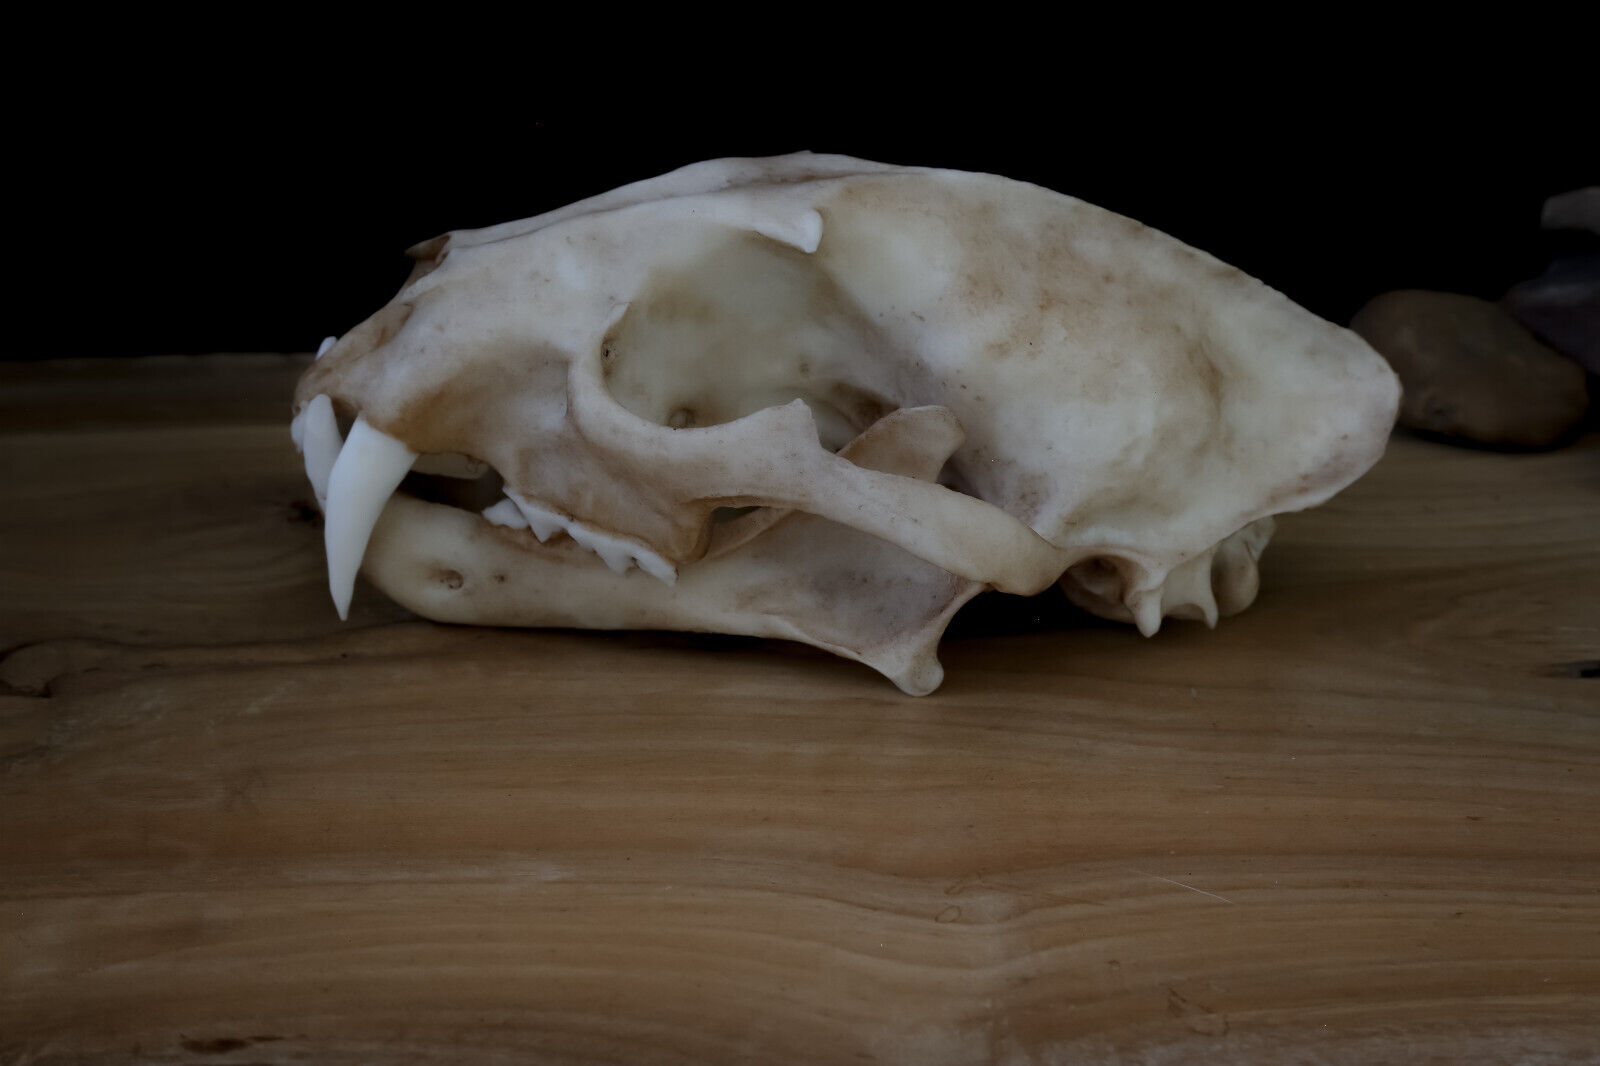 Clouded Leopard skull - high quality replica - FREE world wide shipping.